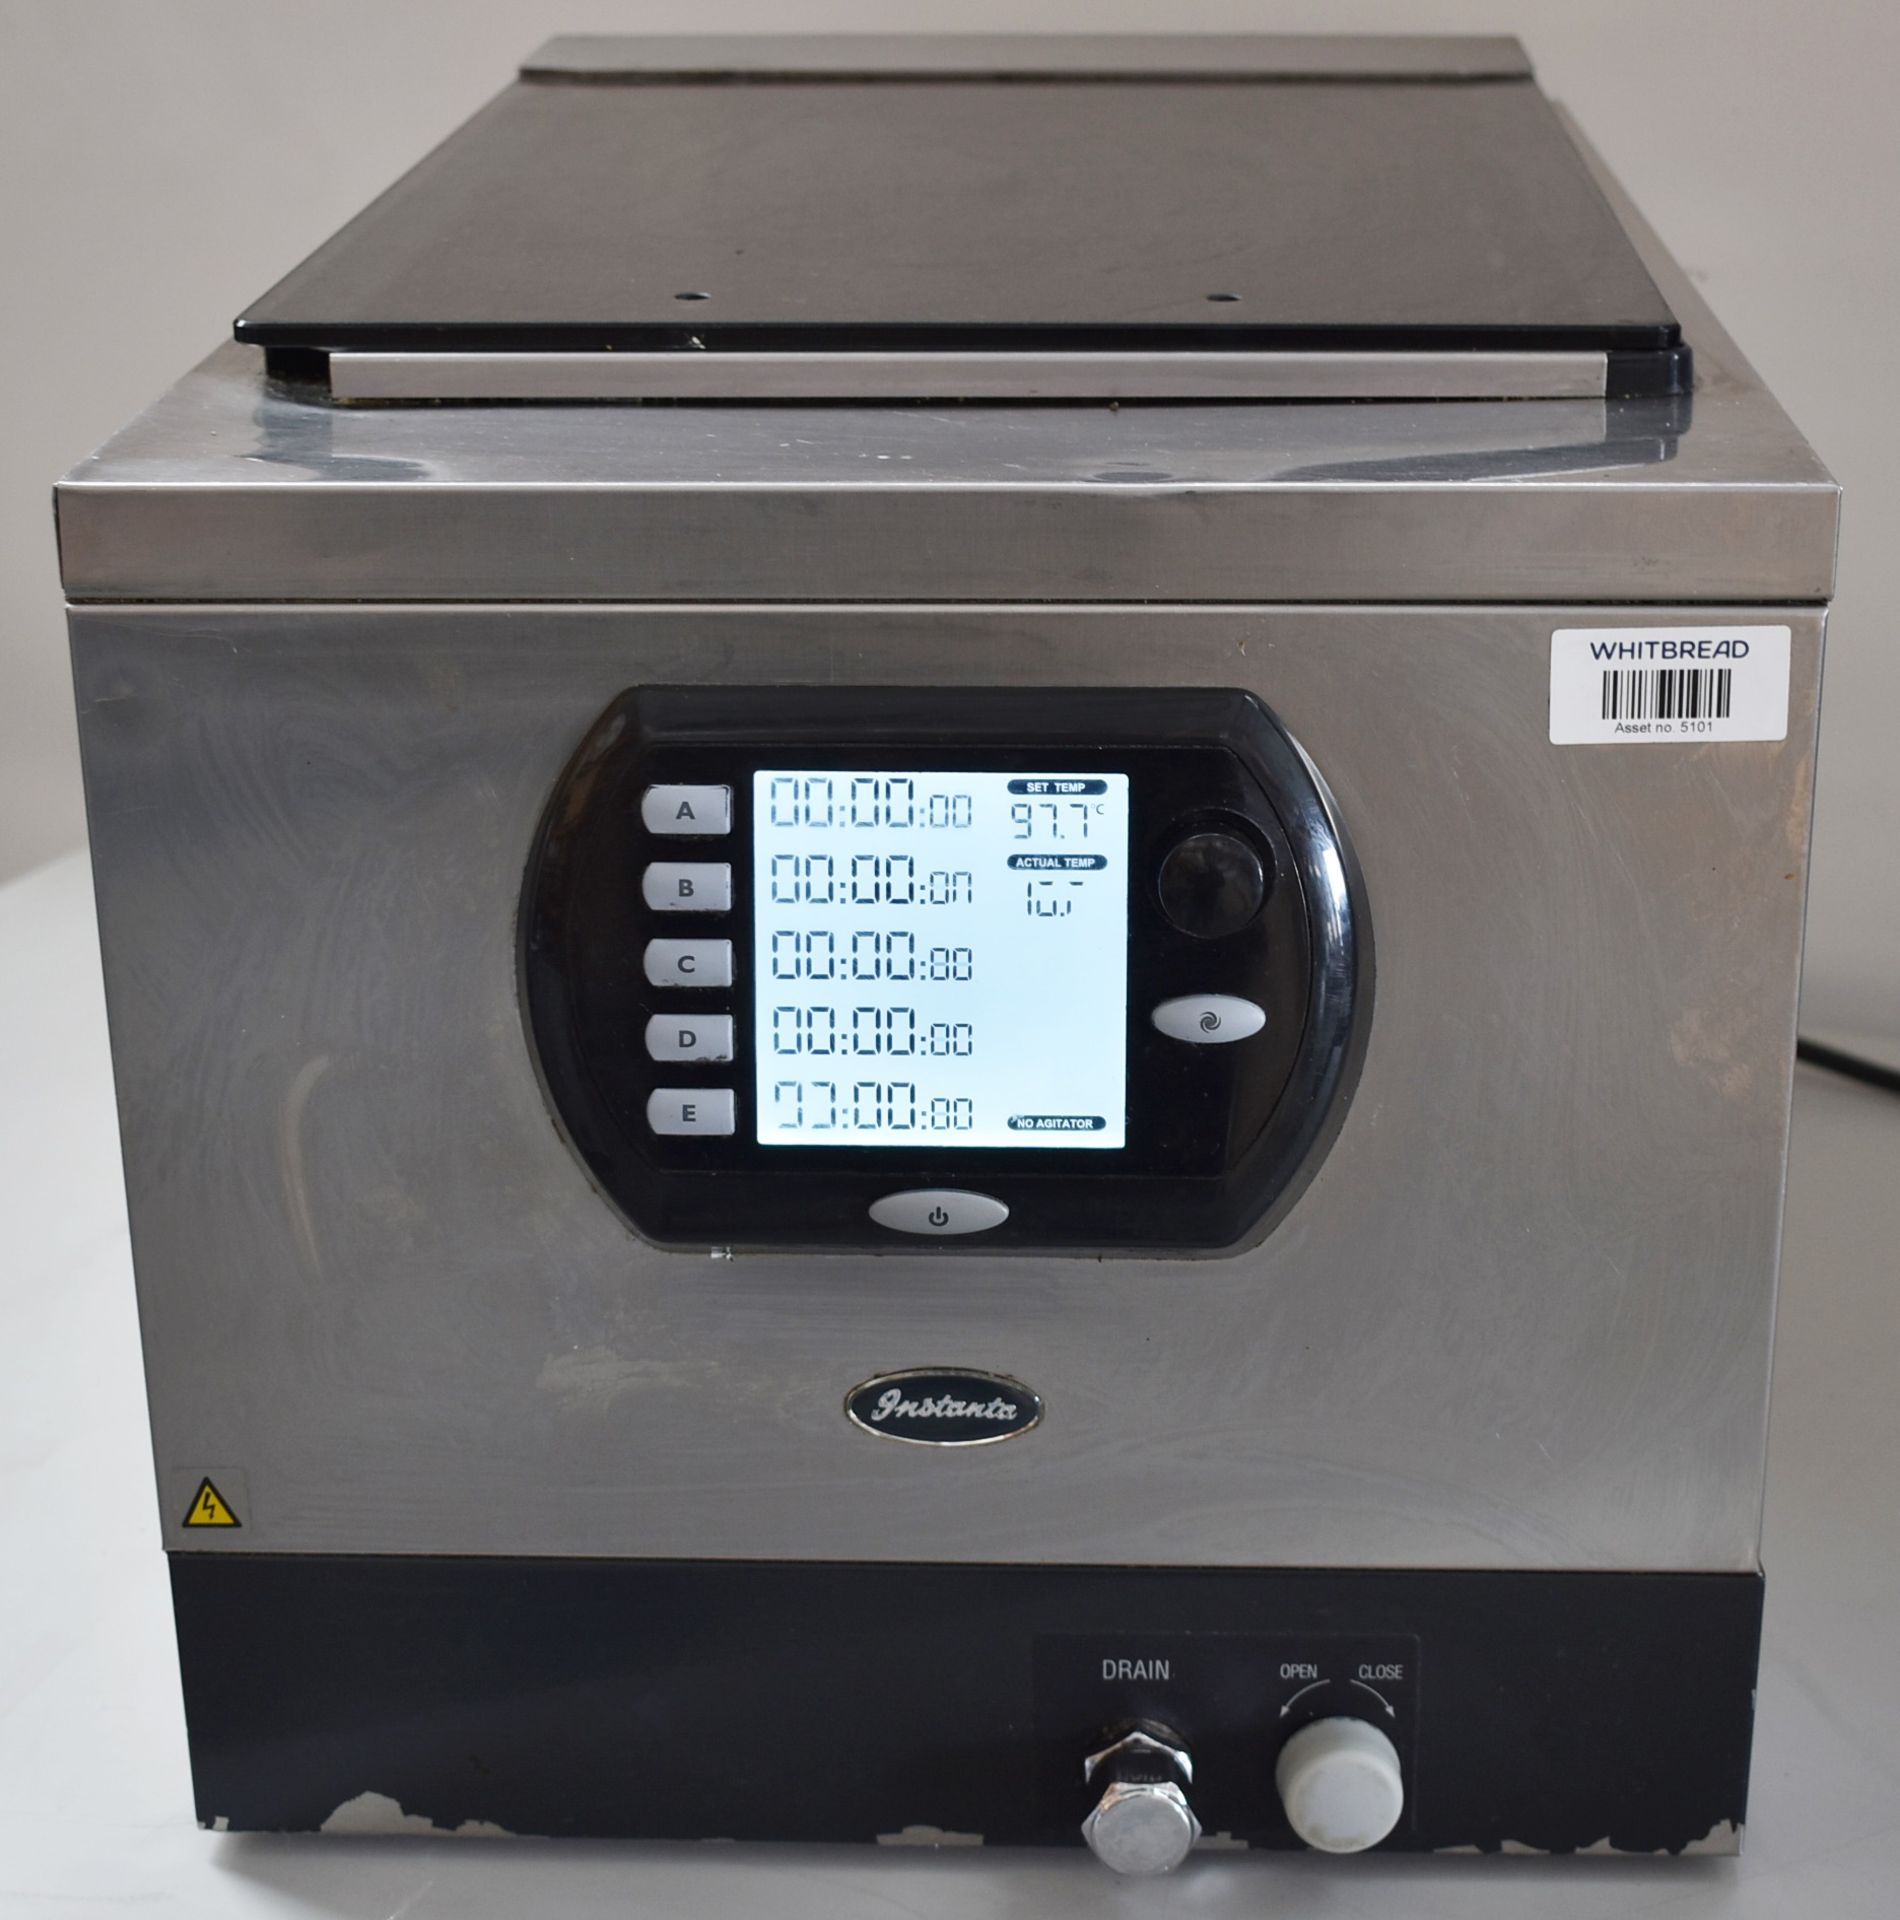 1 x Instanta SV38 Sous Vide Digital Water Bath - CL232 - Ref H395 - Stainless Steel Finish - - Image 2 of 6